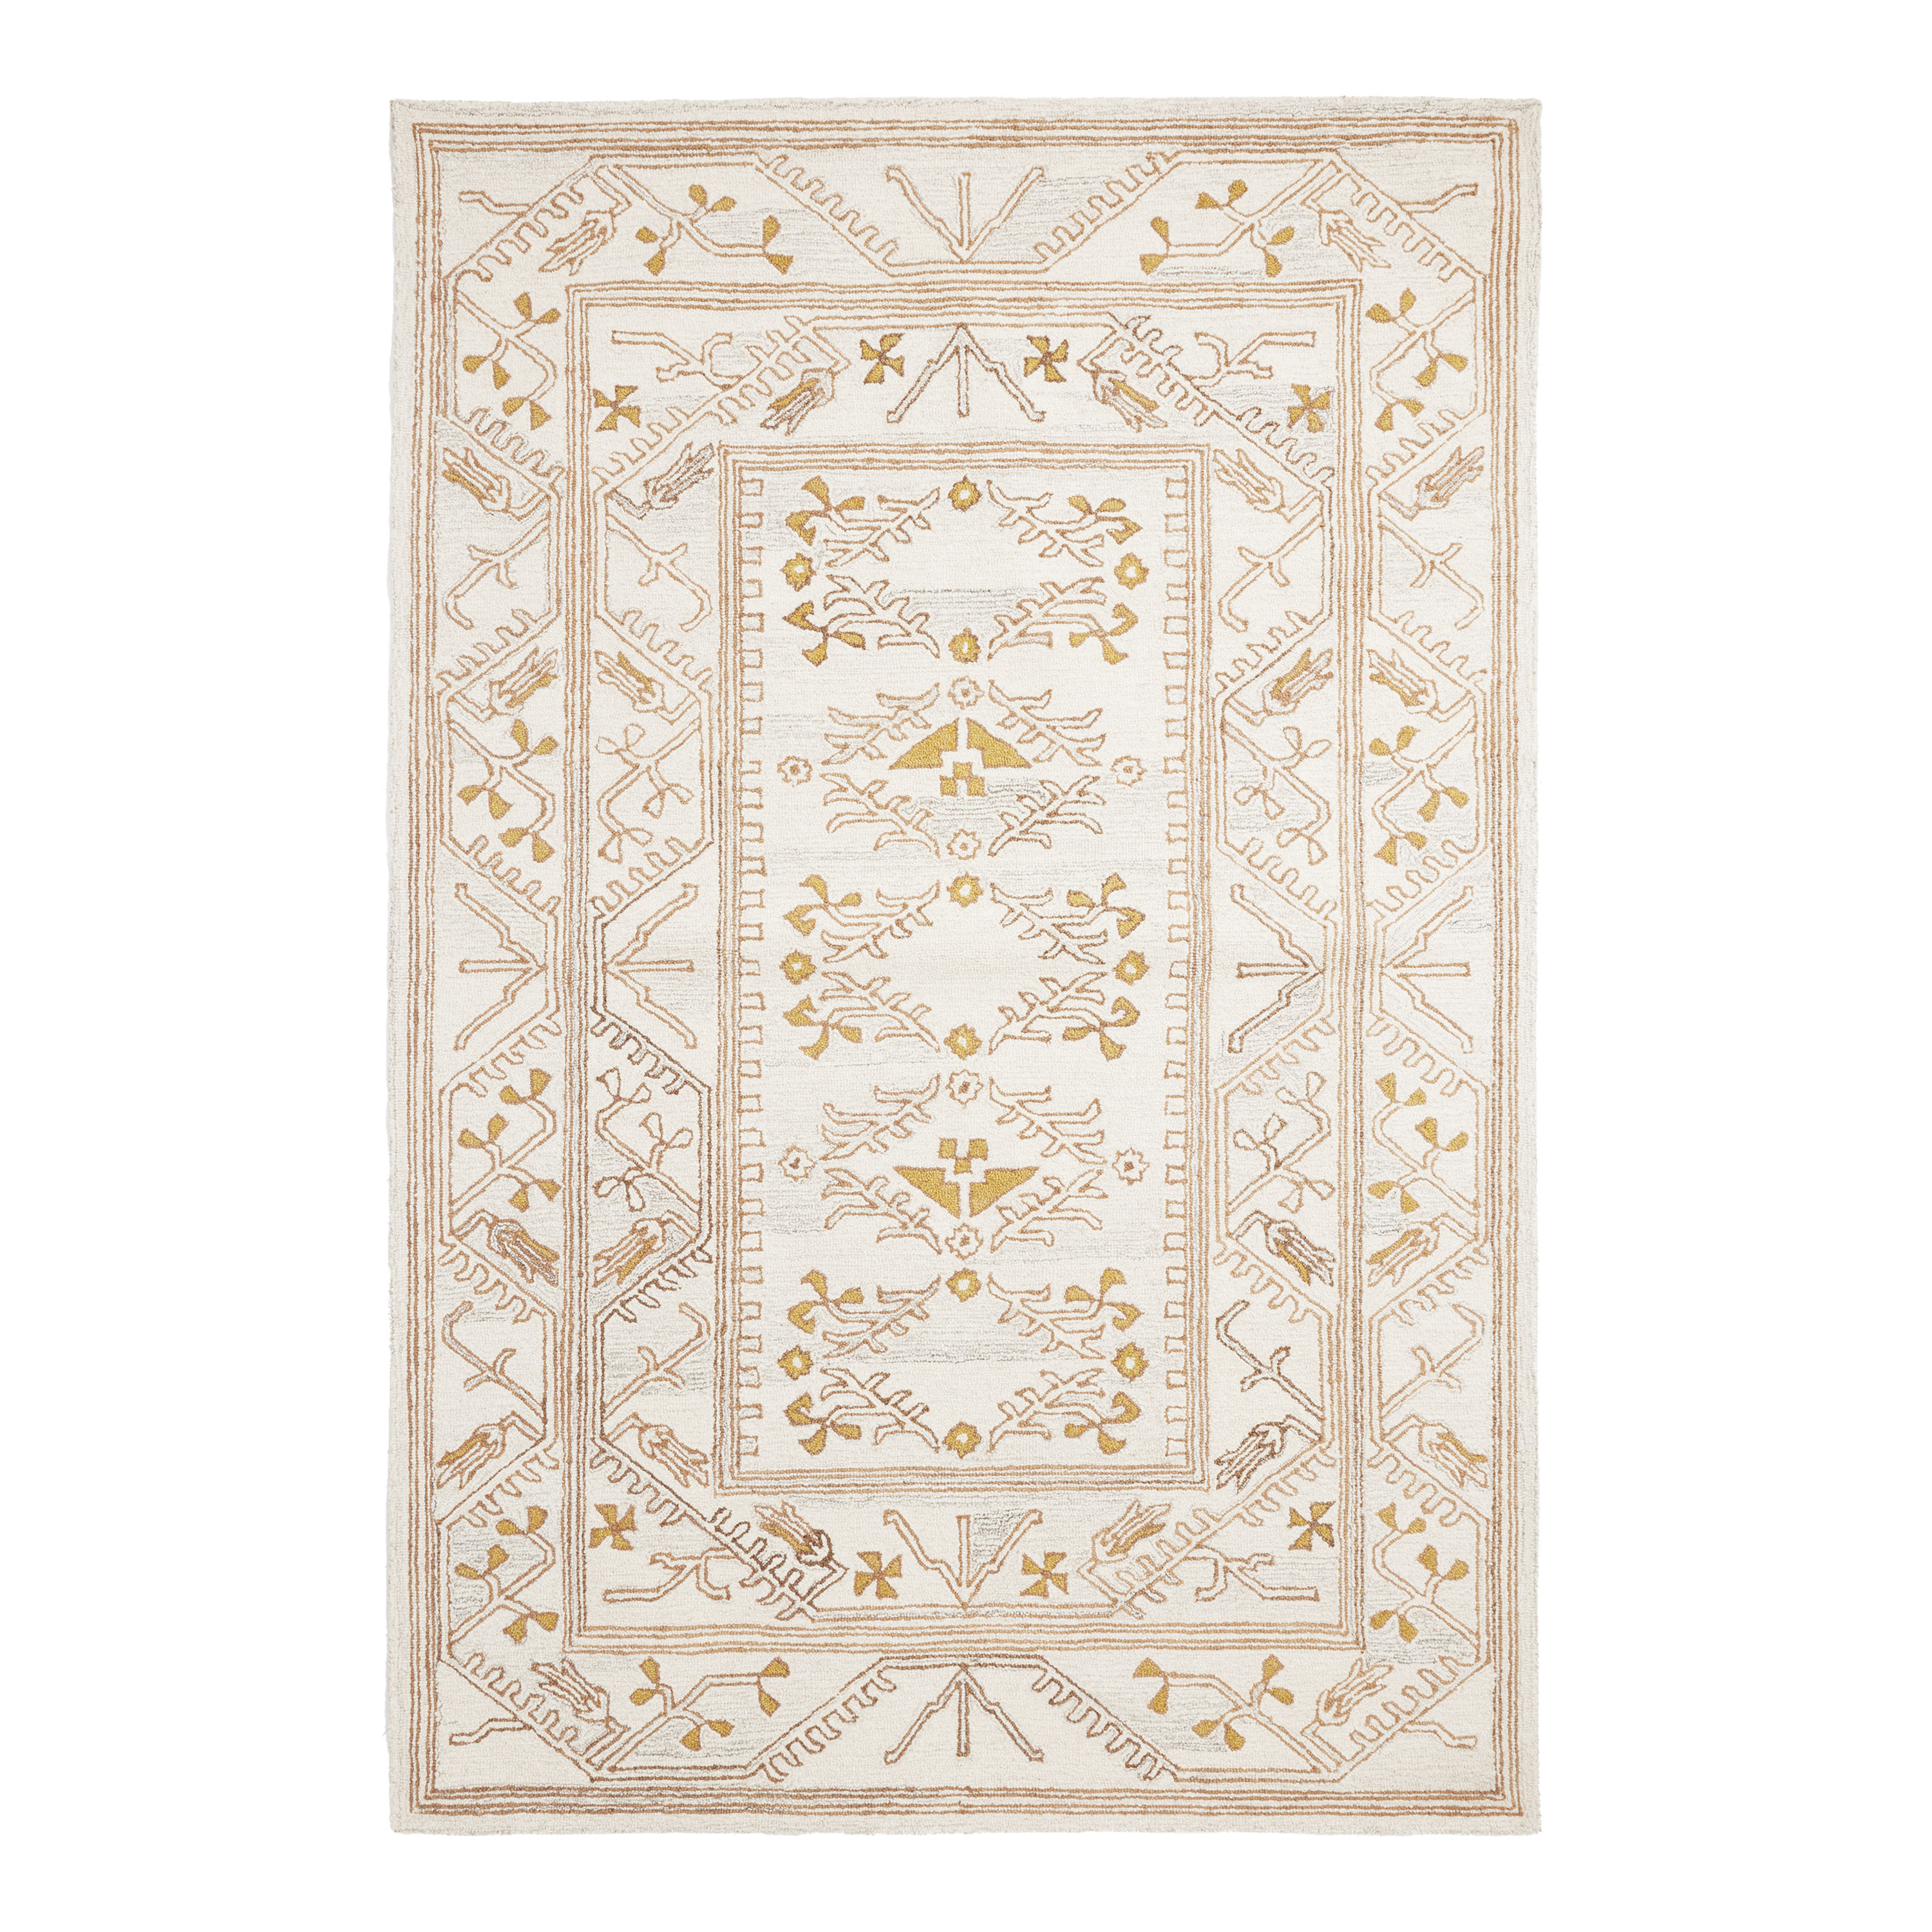 Design Discussion : Wool Rugs in the Bathroom - Room for Tuesday